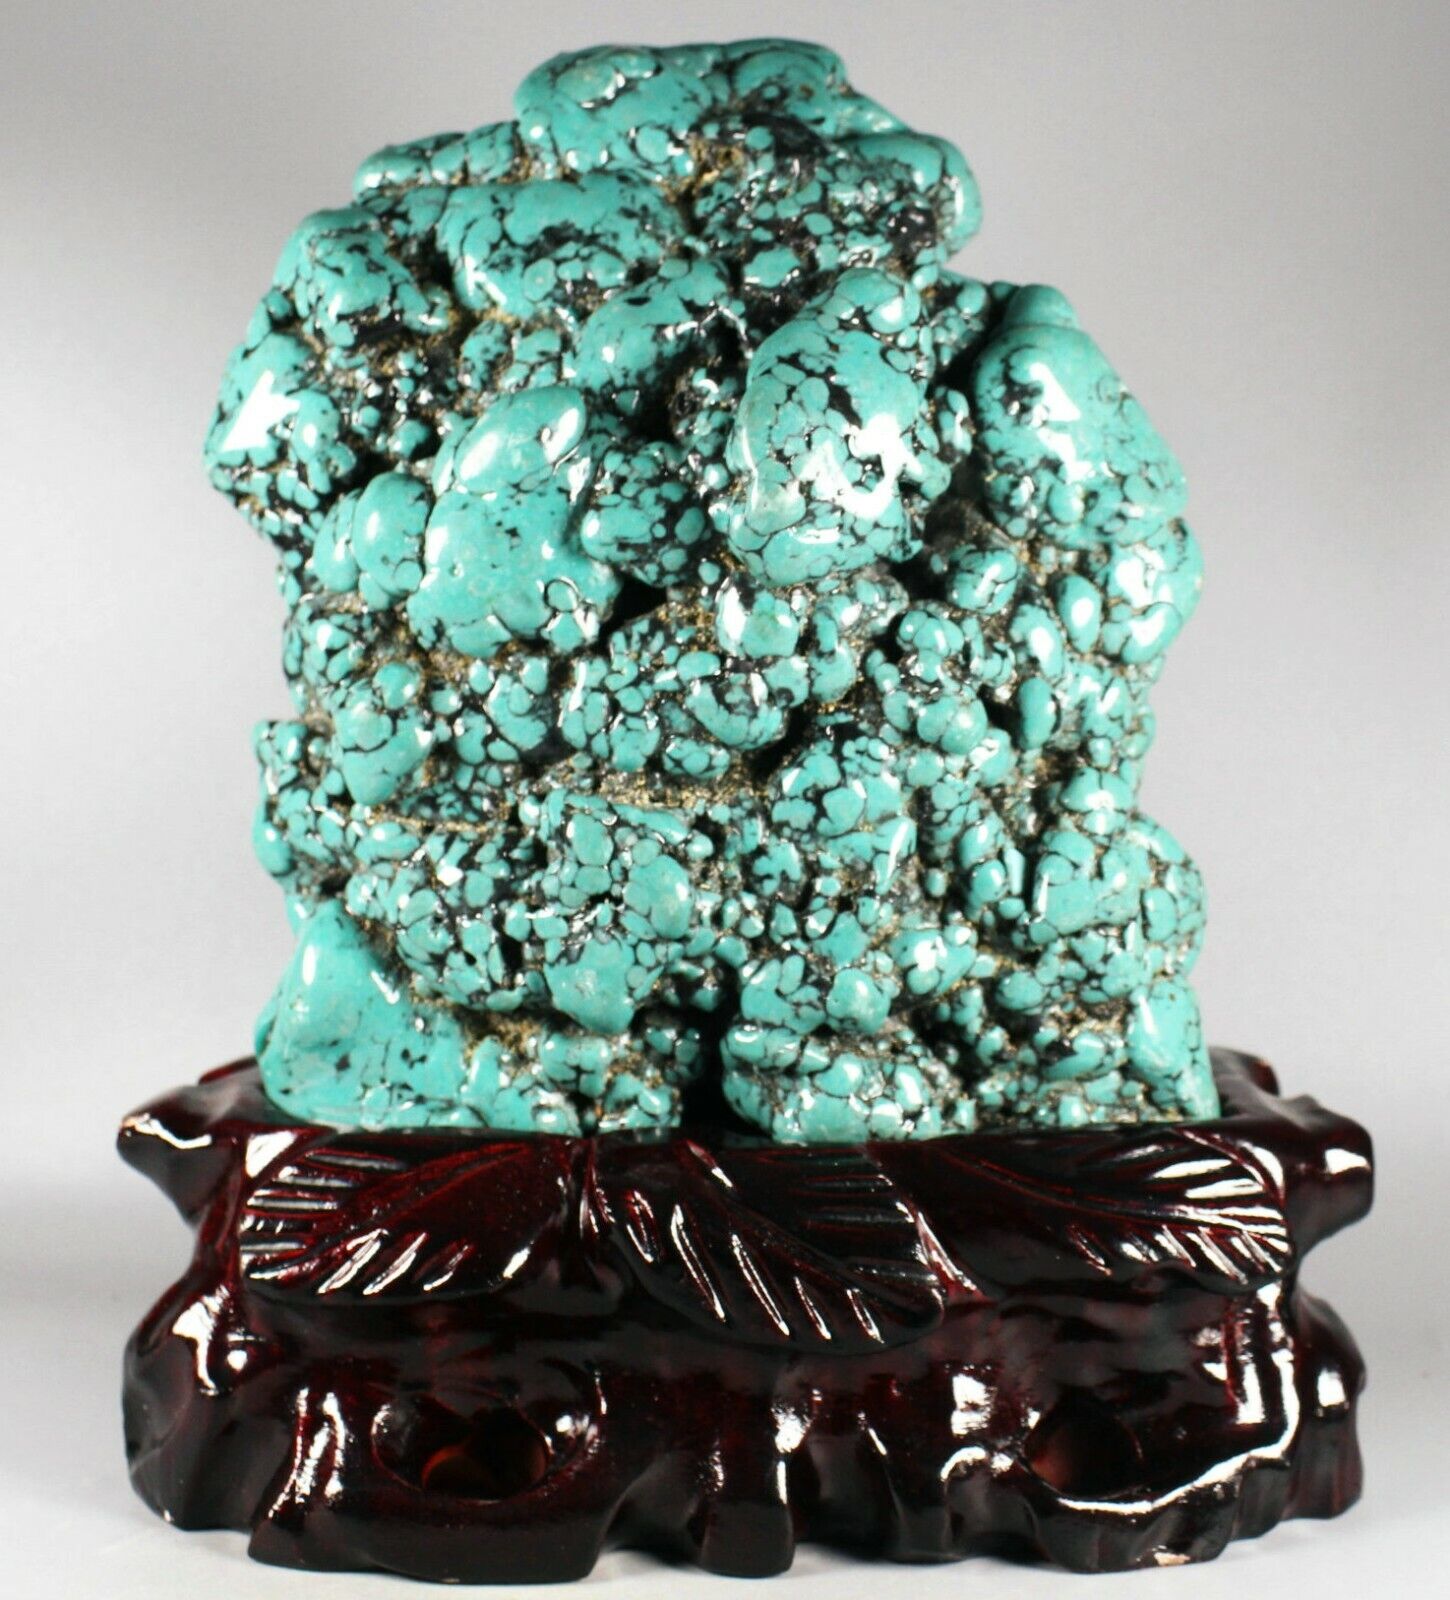 4.84 lb Green turquoise gemstone rough stone Crystal mineral specimen W stand